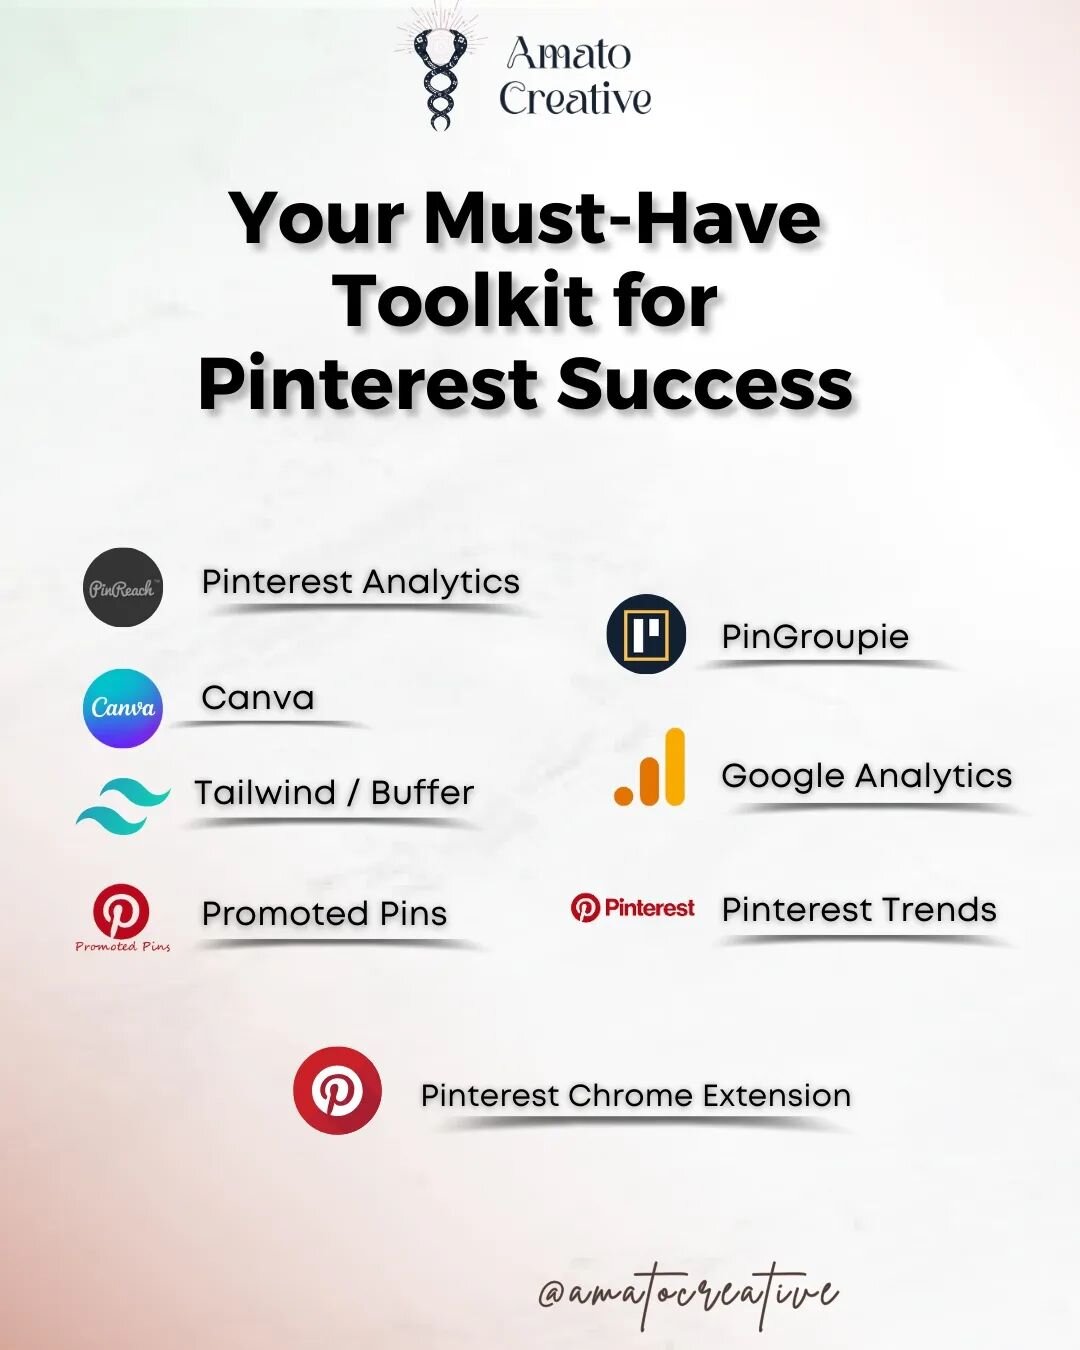 Fuel your Pinterest success with these essential tools! 🚀✨ 

📊 𝐏𝐢𝐧𝐭𝐞𝐫𝐞𝐬𝐭 𝐀𝐧𝐚𝐥𝐲𝐭𝐢𝐜𝐬: Gain insights into your Pins and boards, fine-tune your content strategy based on what resonates with your audience. 

🎨 No design skills? No pro